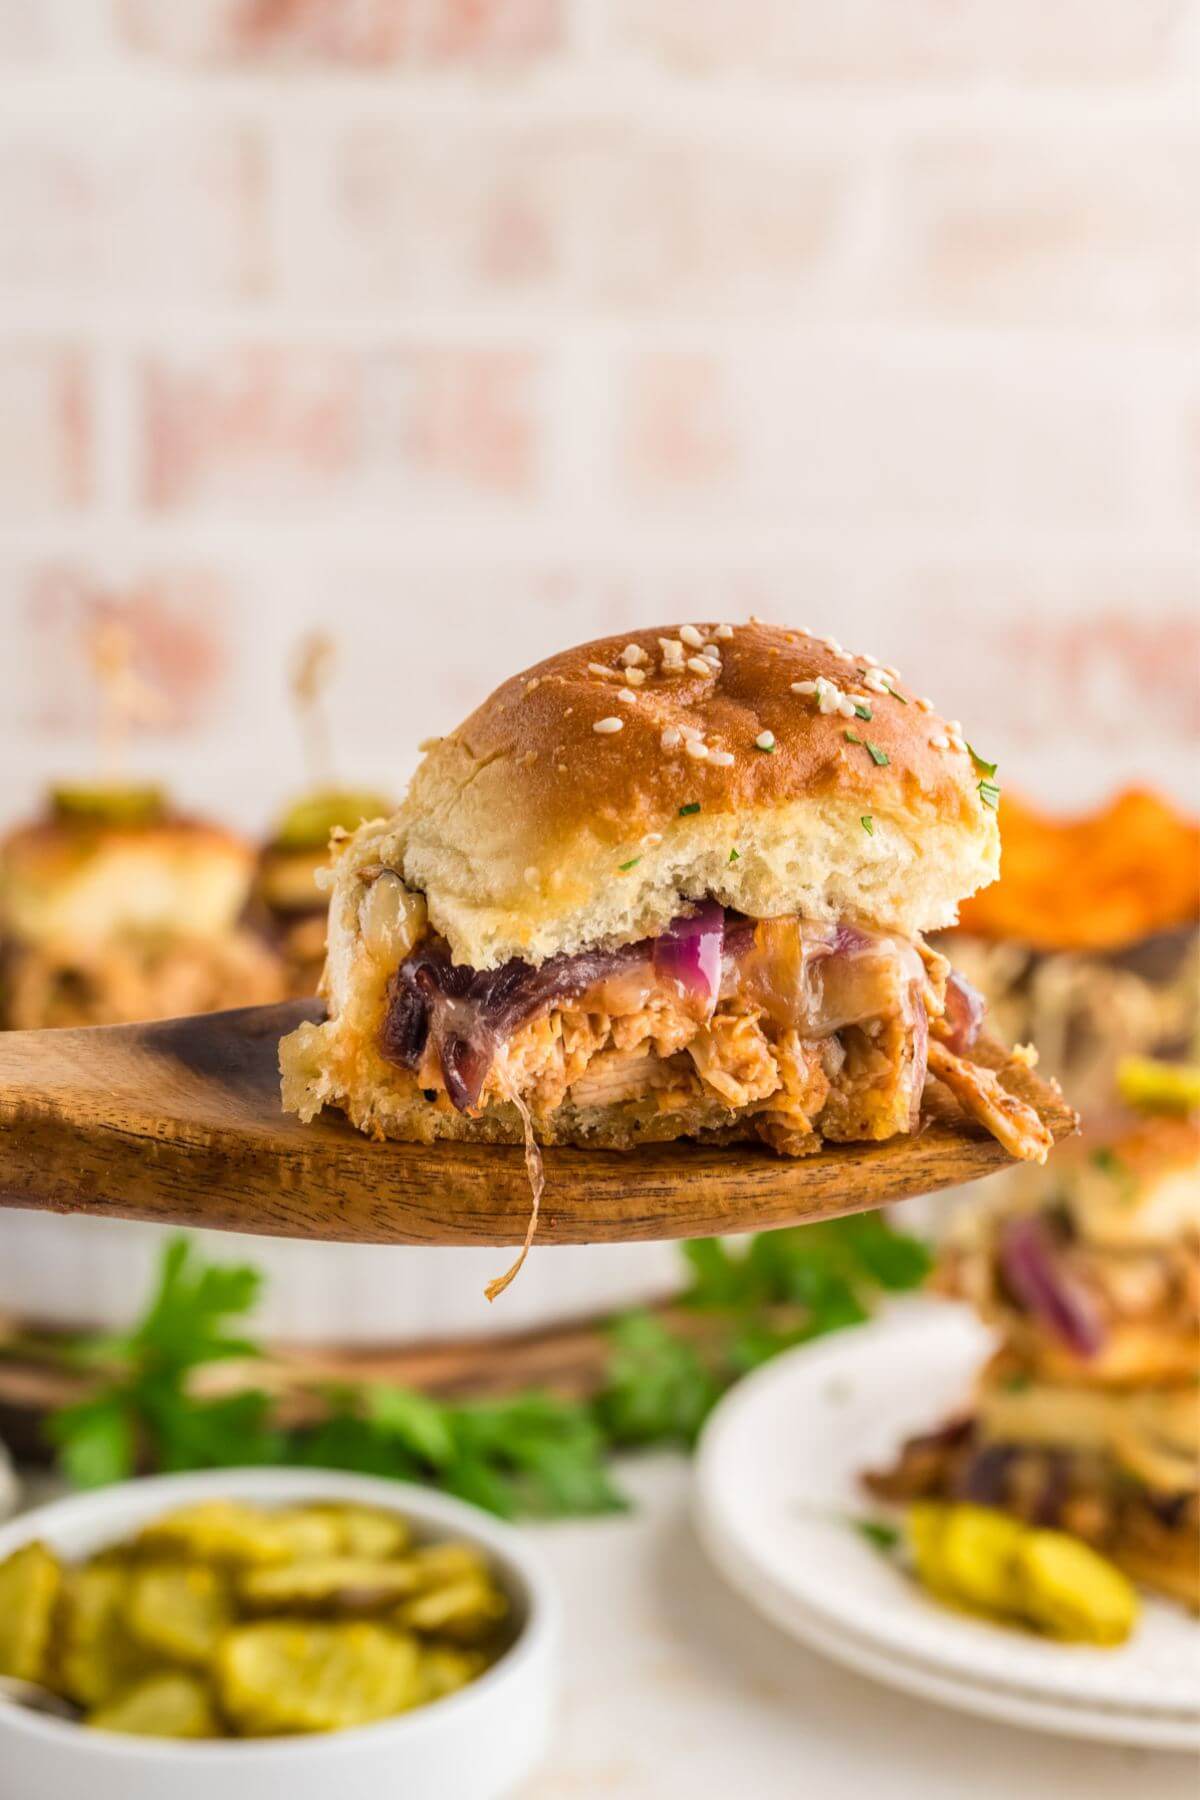 BBQ Chicken Sliders in background with centered focus on slider lifted on a wooden spoon showing filling.